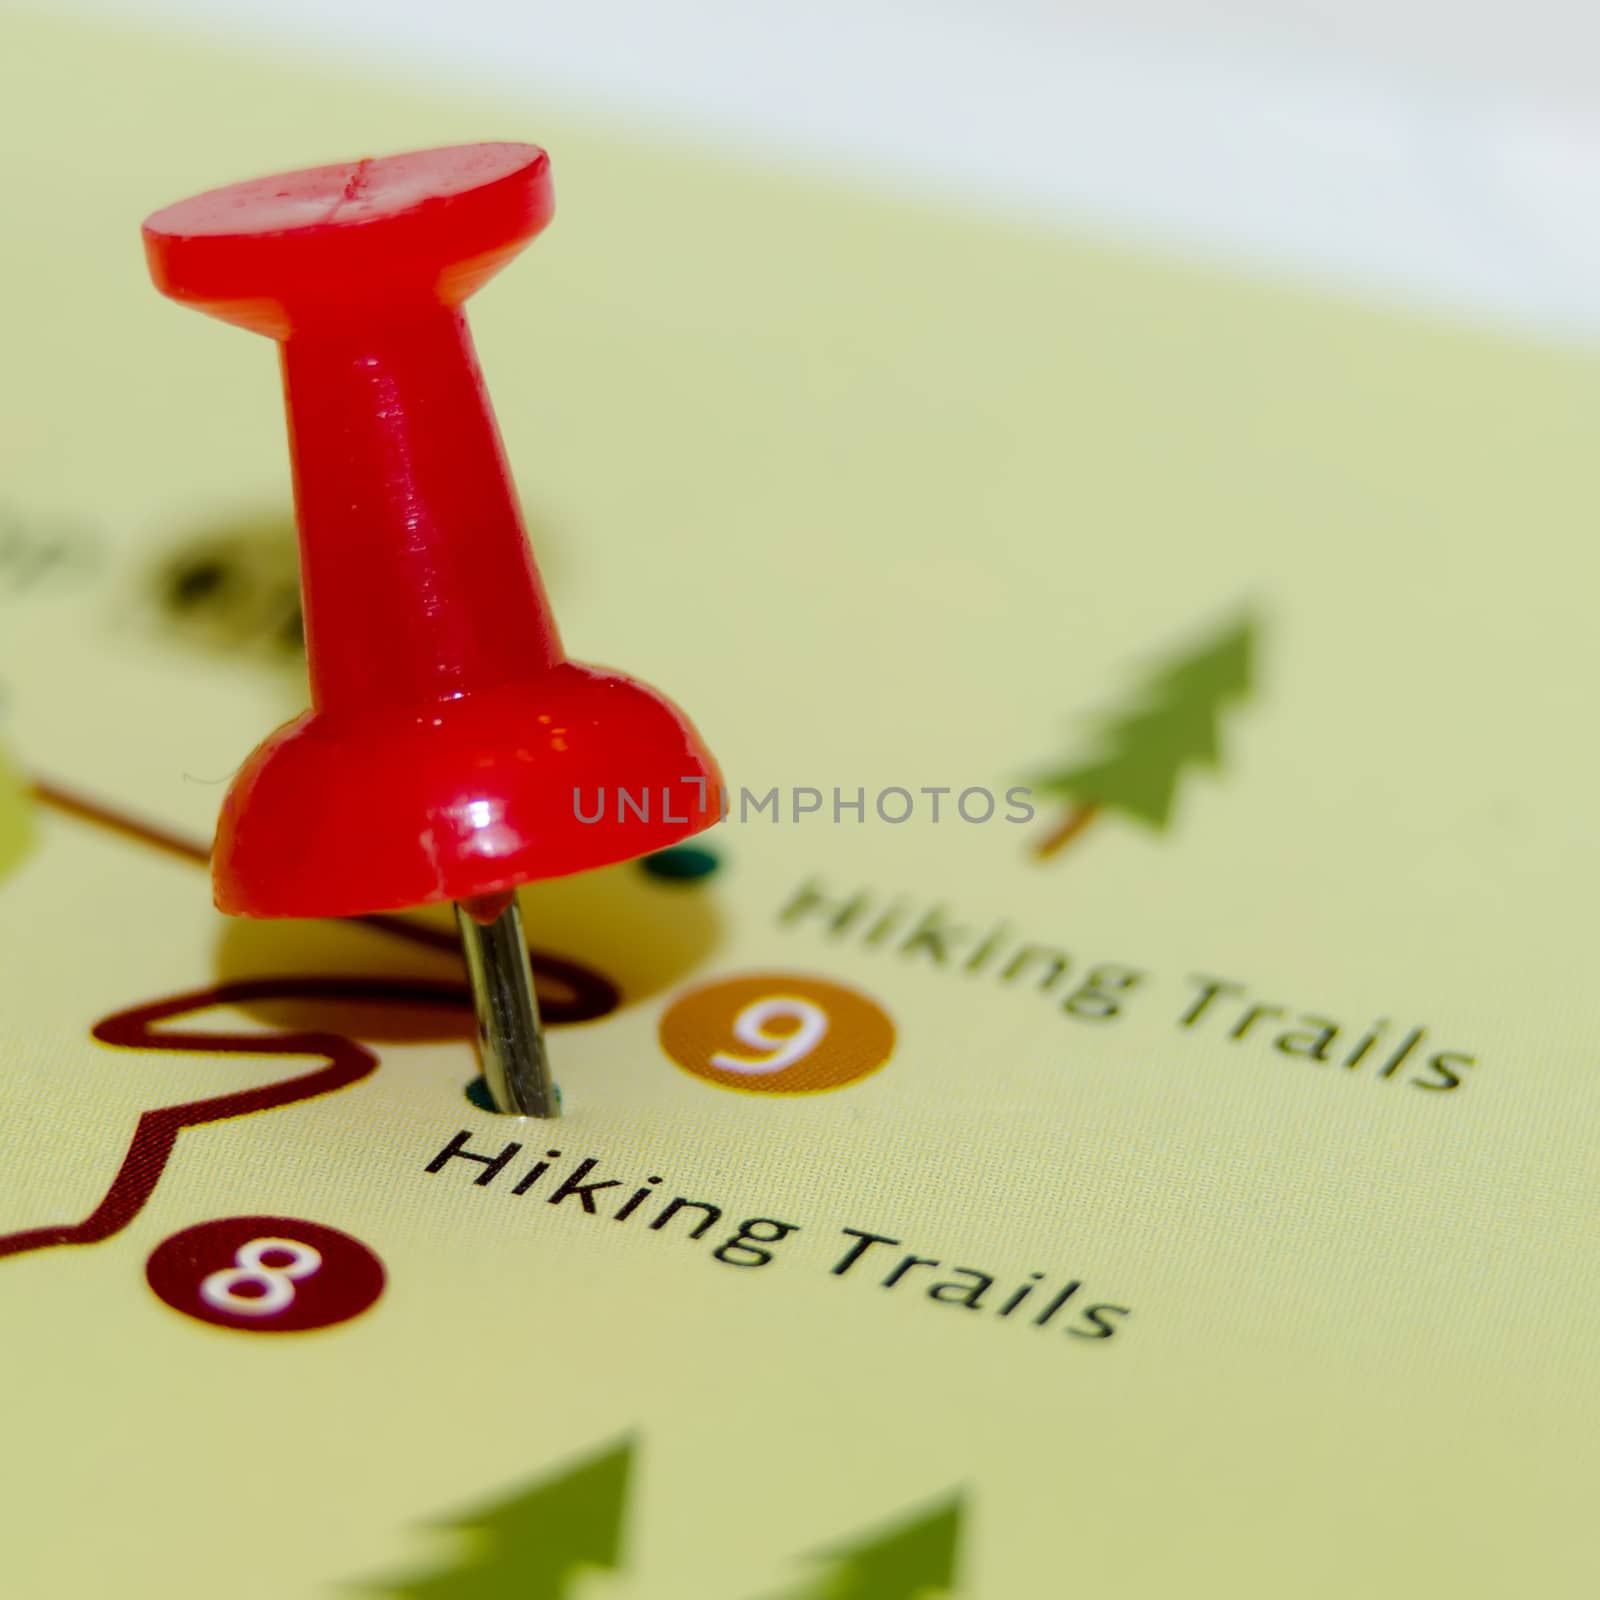 hiking trails pin on the map by digidreamgrafix